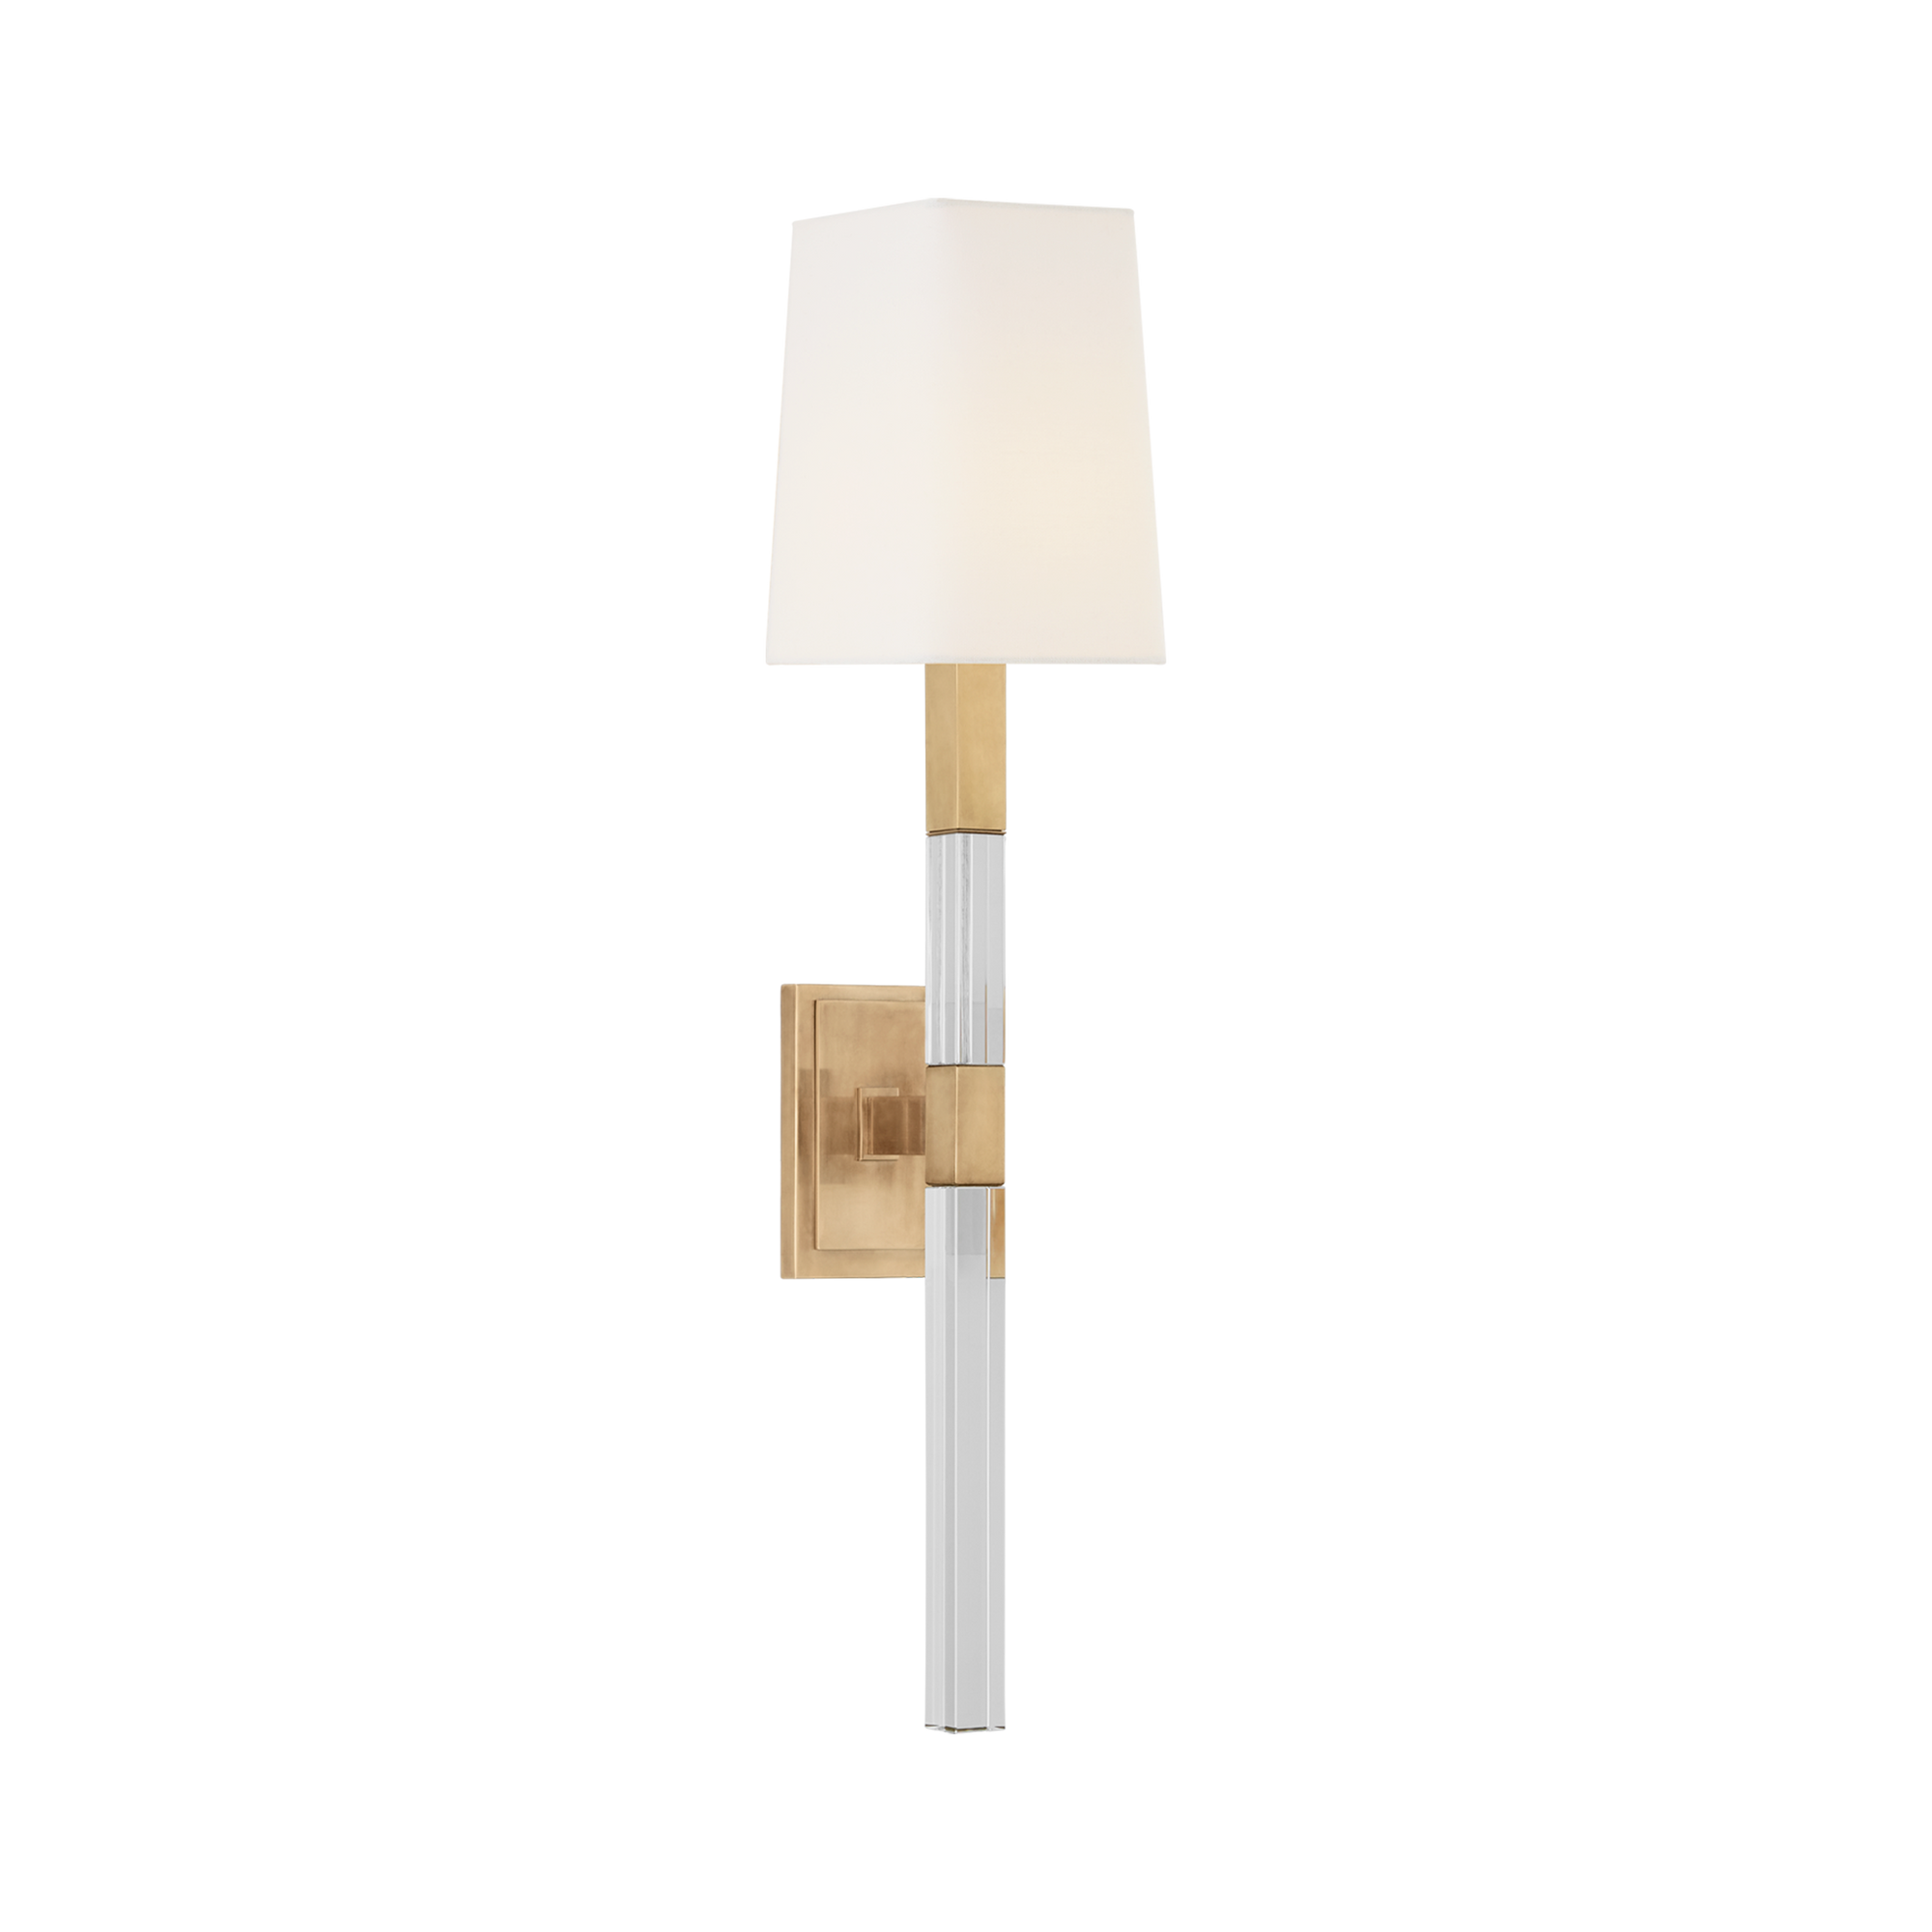 Modern and geometric, the Reagan Medium Tail Sconce combines the translucence of solid crystal with the architectural precision of polished metal.